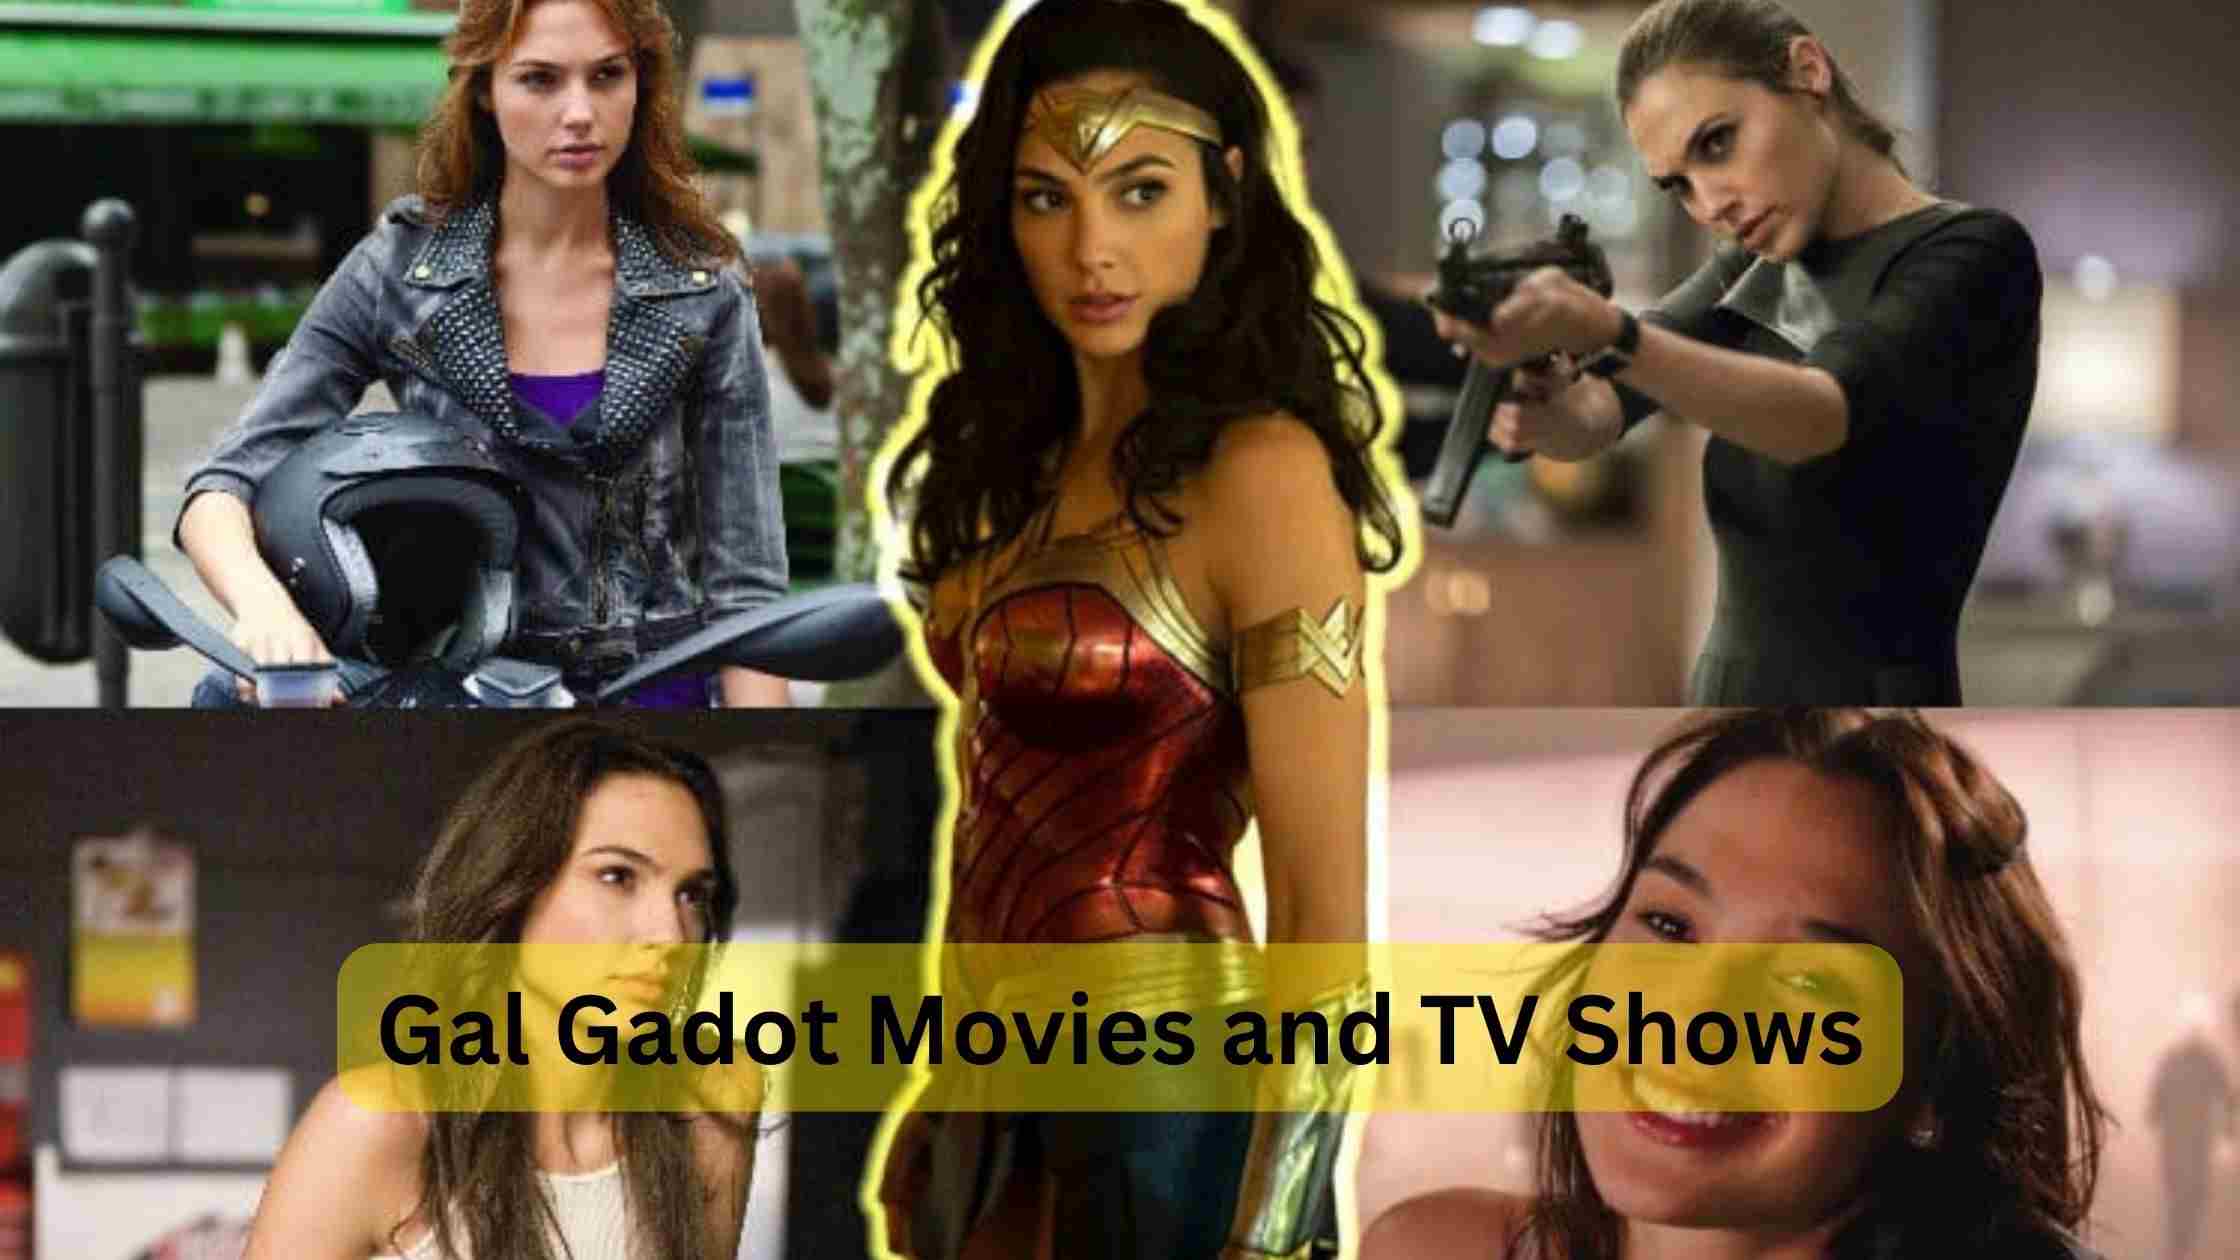 Gal Gadot Movies and TV Shows